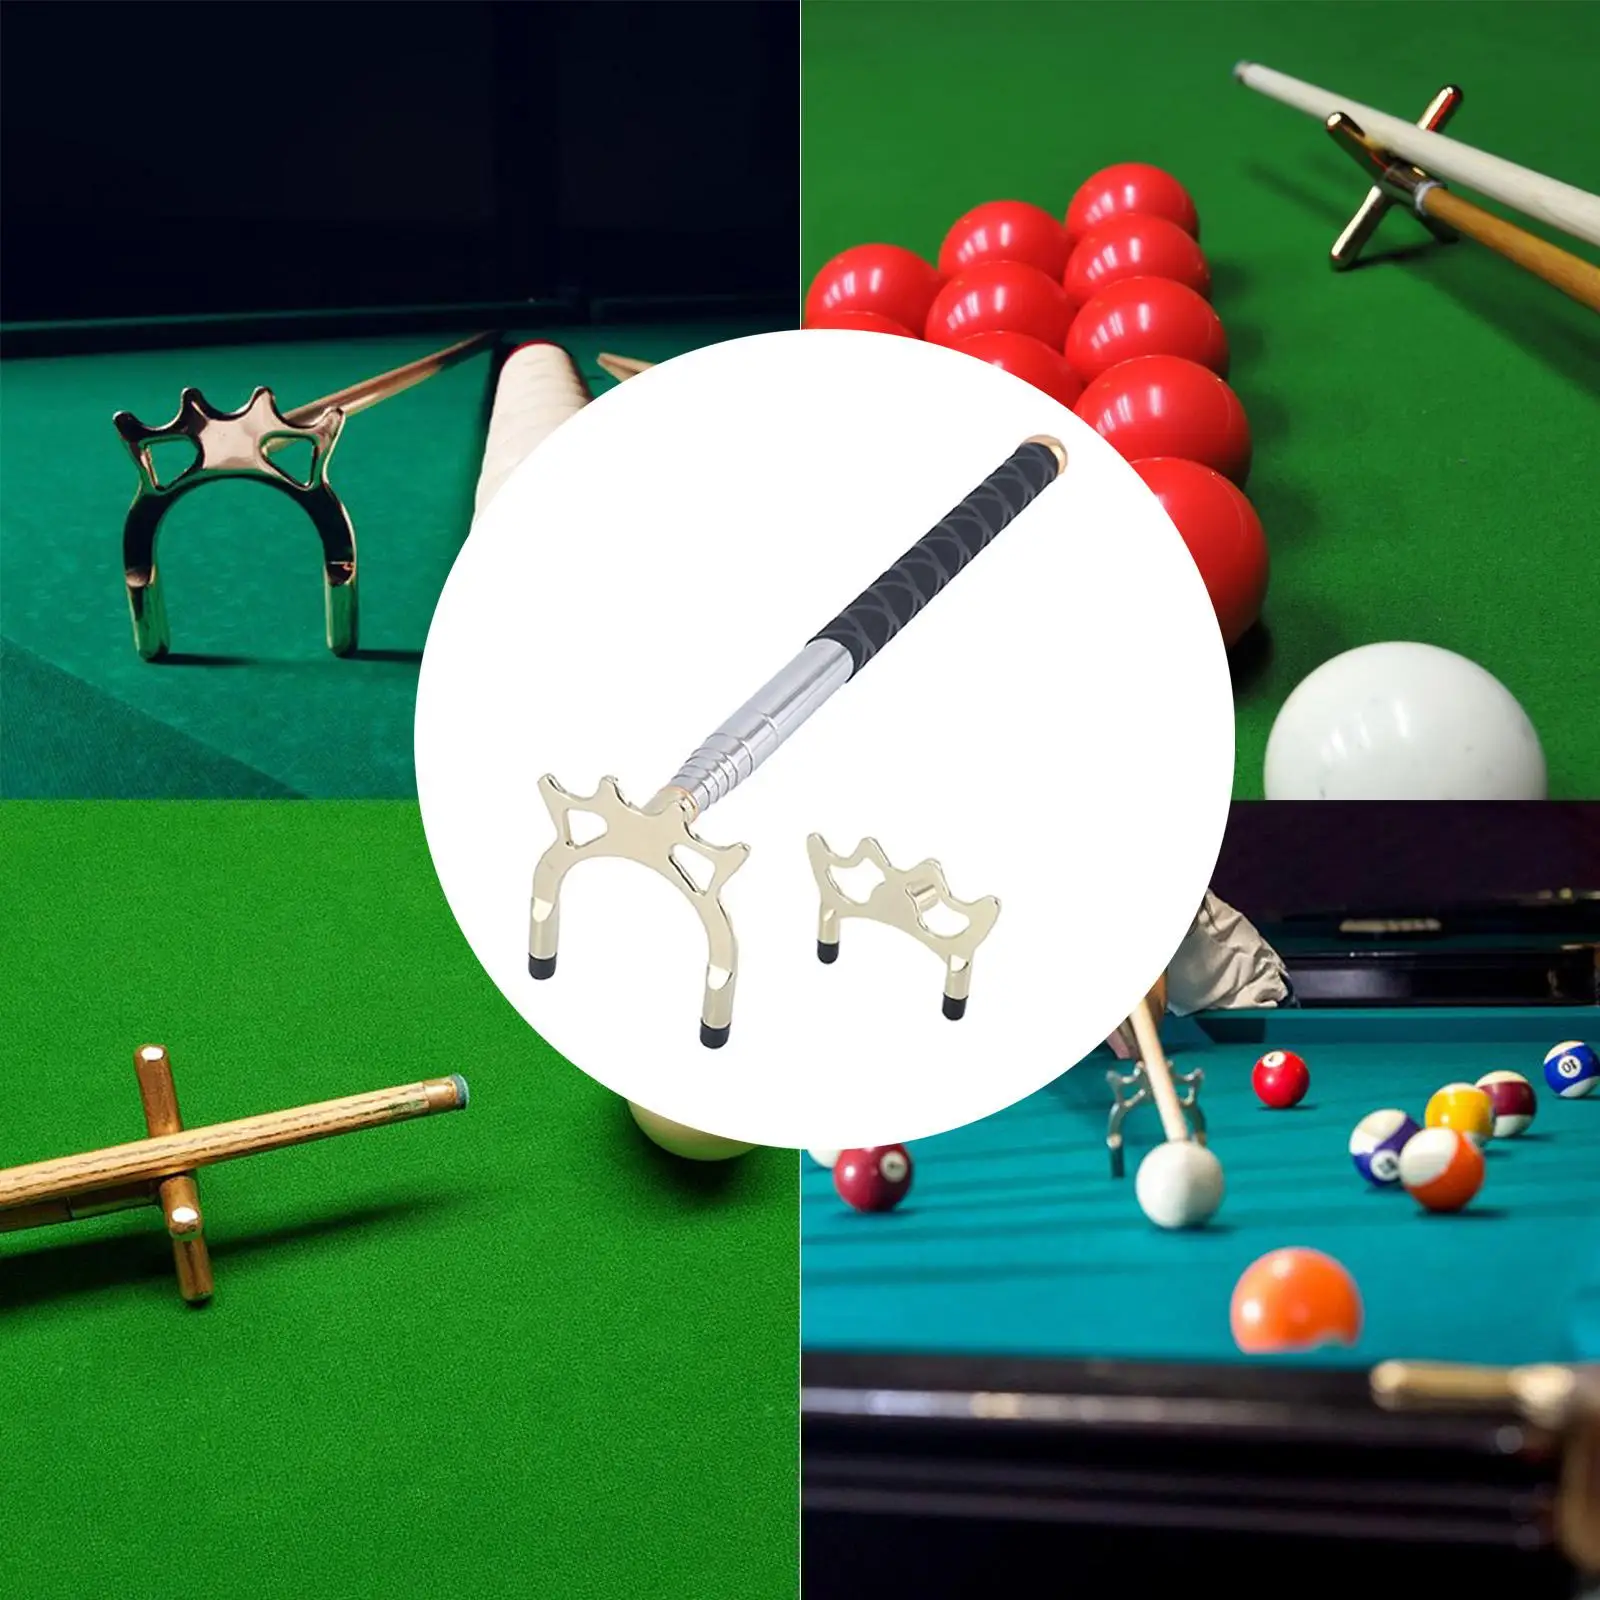 Durable Billiards Pool Cue Bridge Stick with Bridge Head Retractable Stainless Steel Replacement for Playing Pool Table Snooker